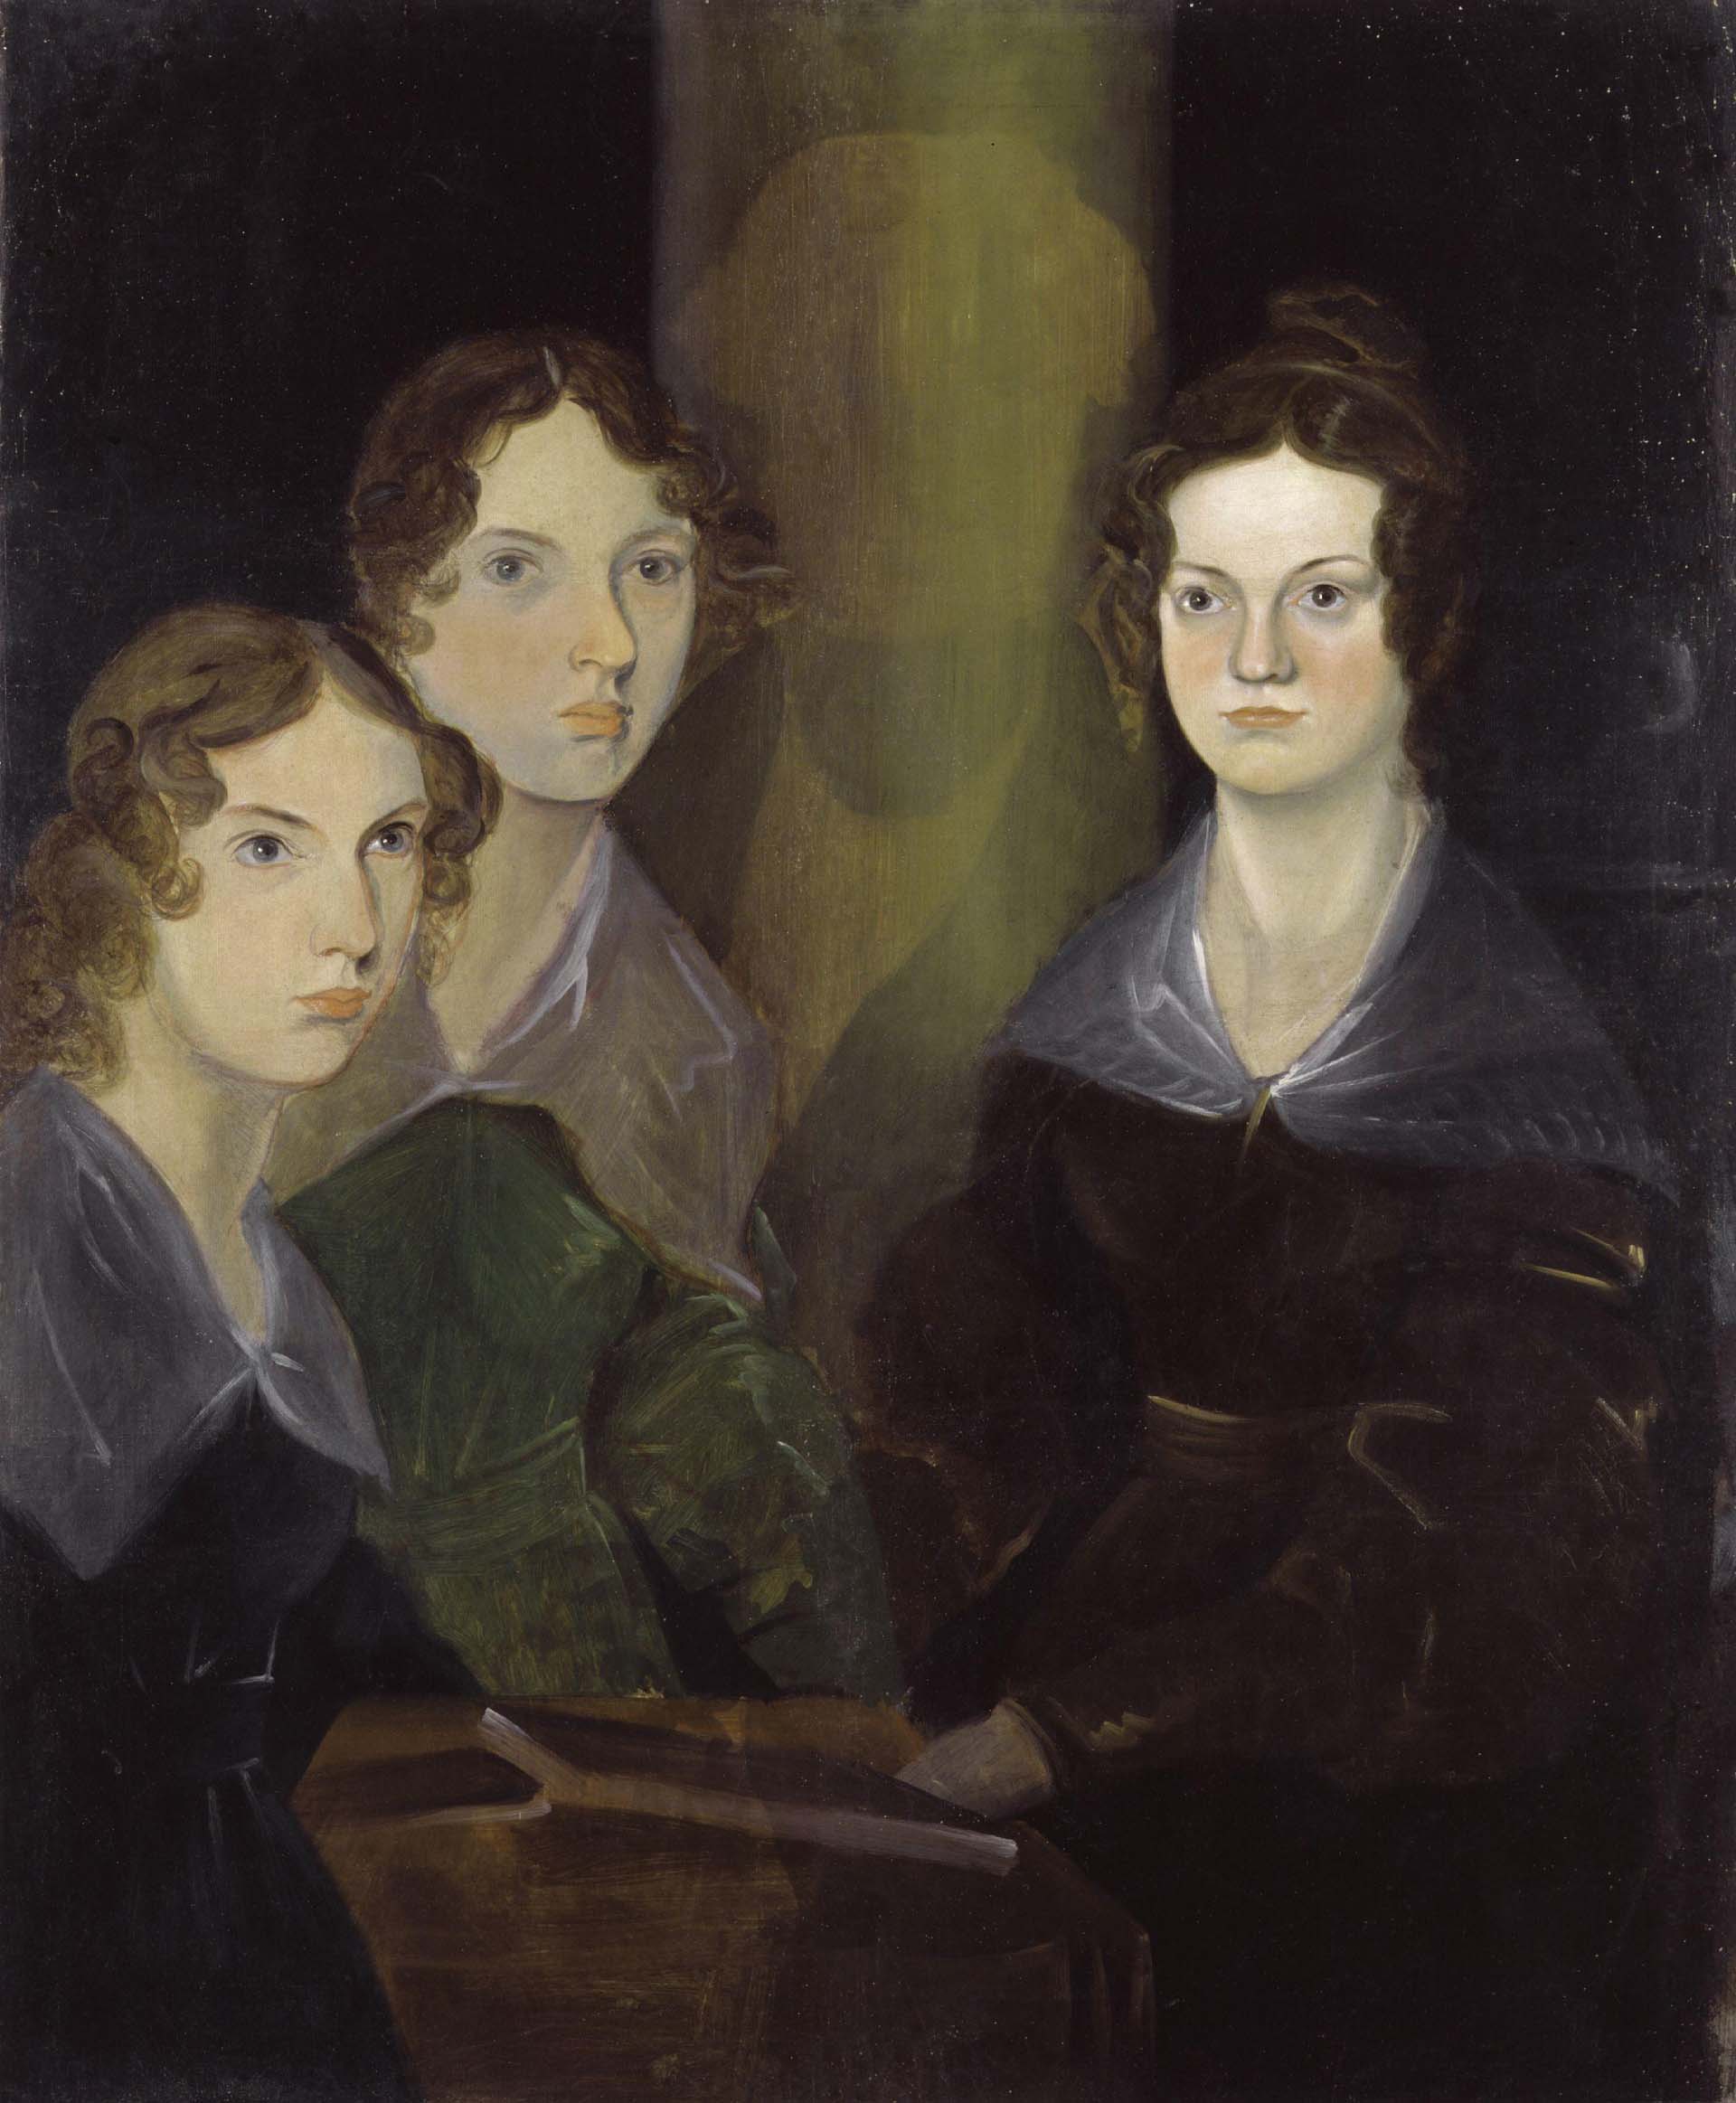 The Brontë sisters (Anne, Emily and Charlotte) in a painting by their brother Branwell from 1834